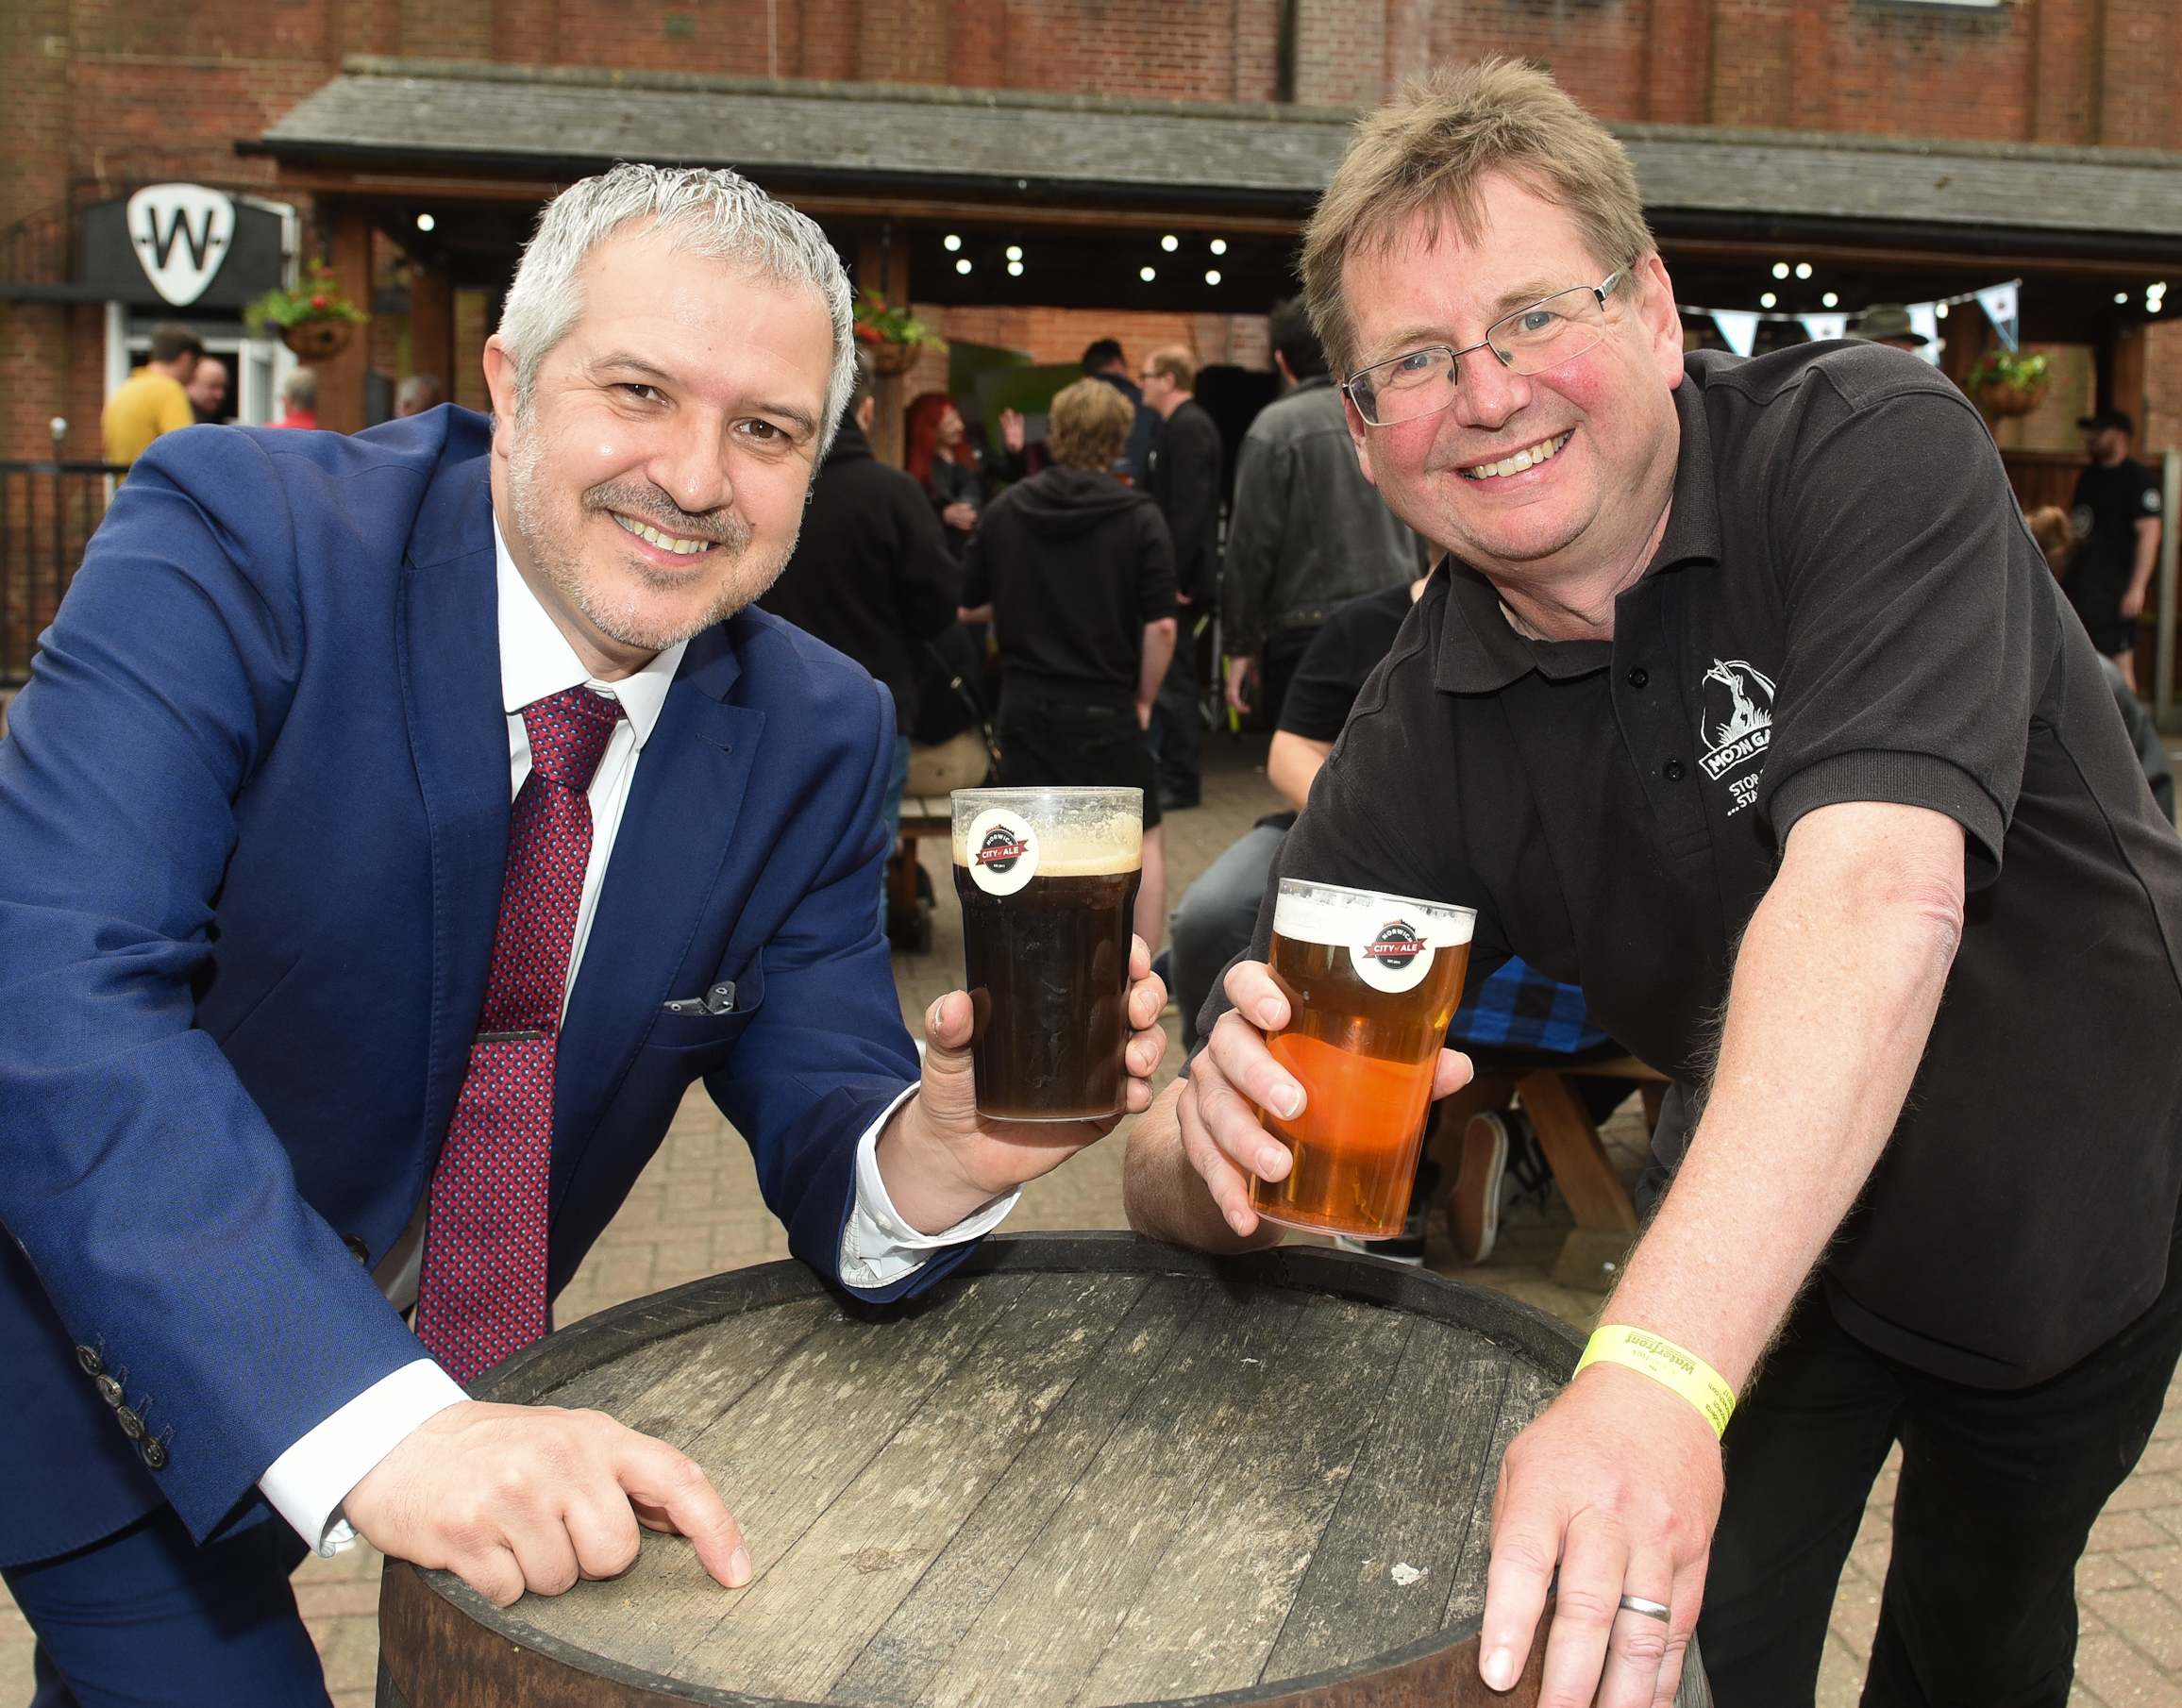 City of Ale 2022 launch at The Waterfront, Norwich.